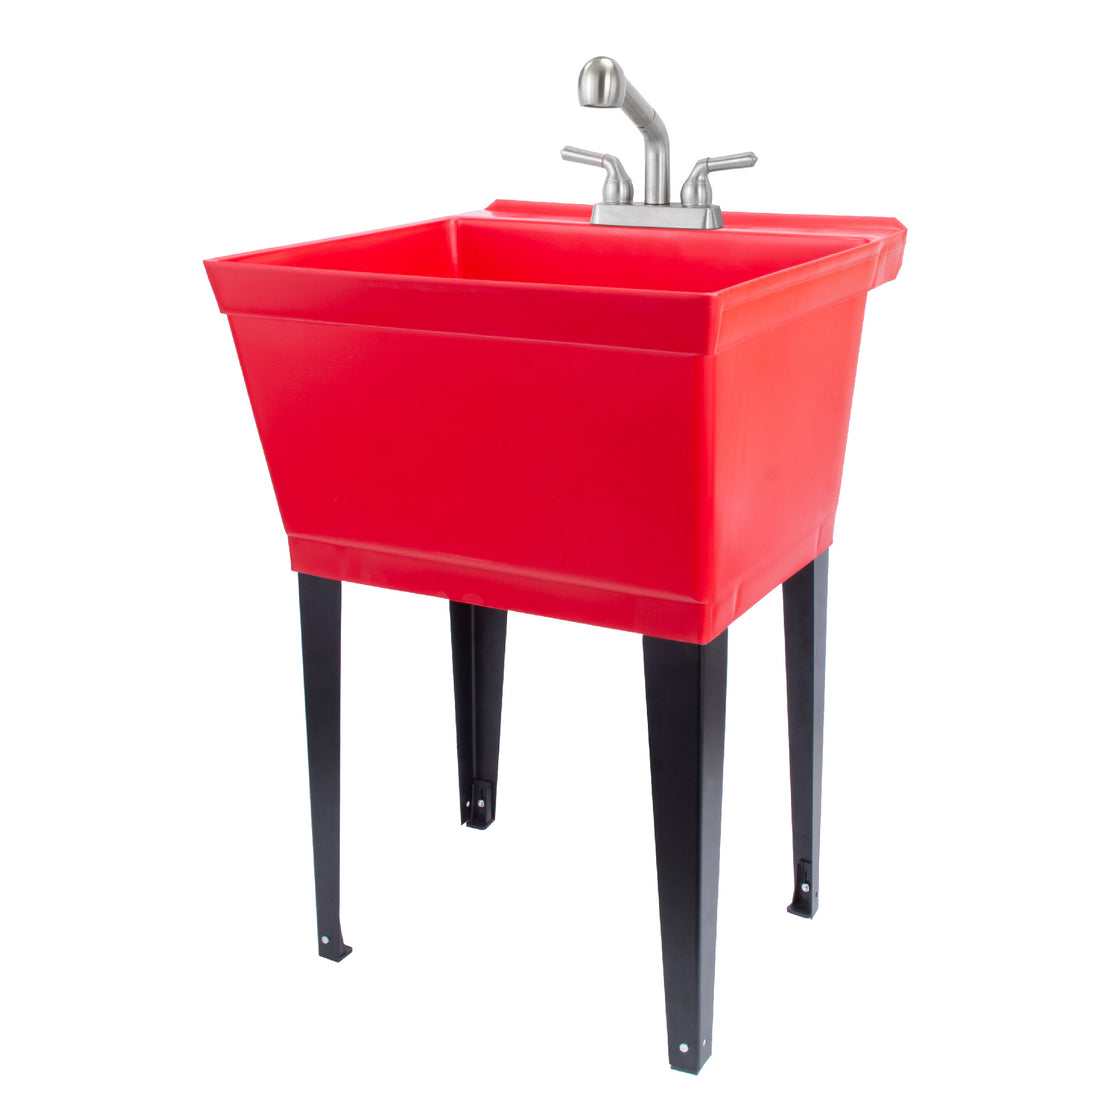 Tehila Standard Freestanding Red Utility Sink with Stainless Steel Finish Pull-Out Faucet - Utility sinks vanites Tehila